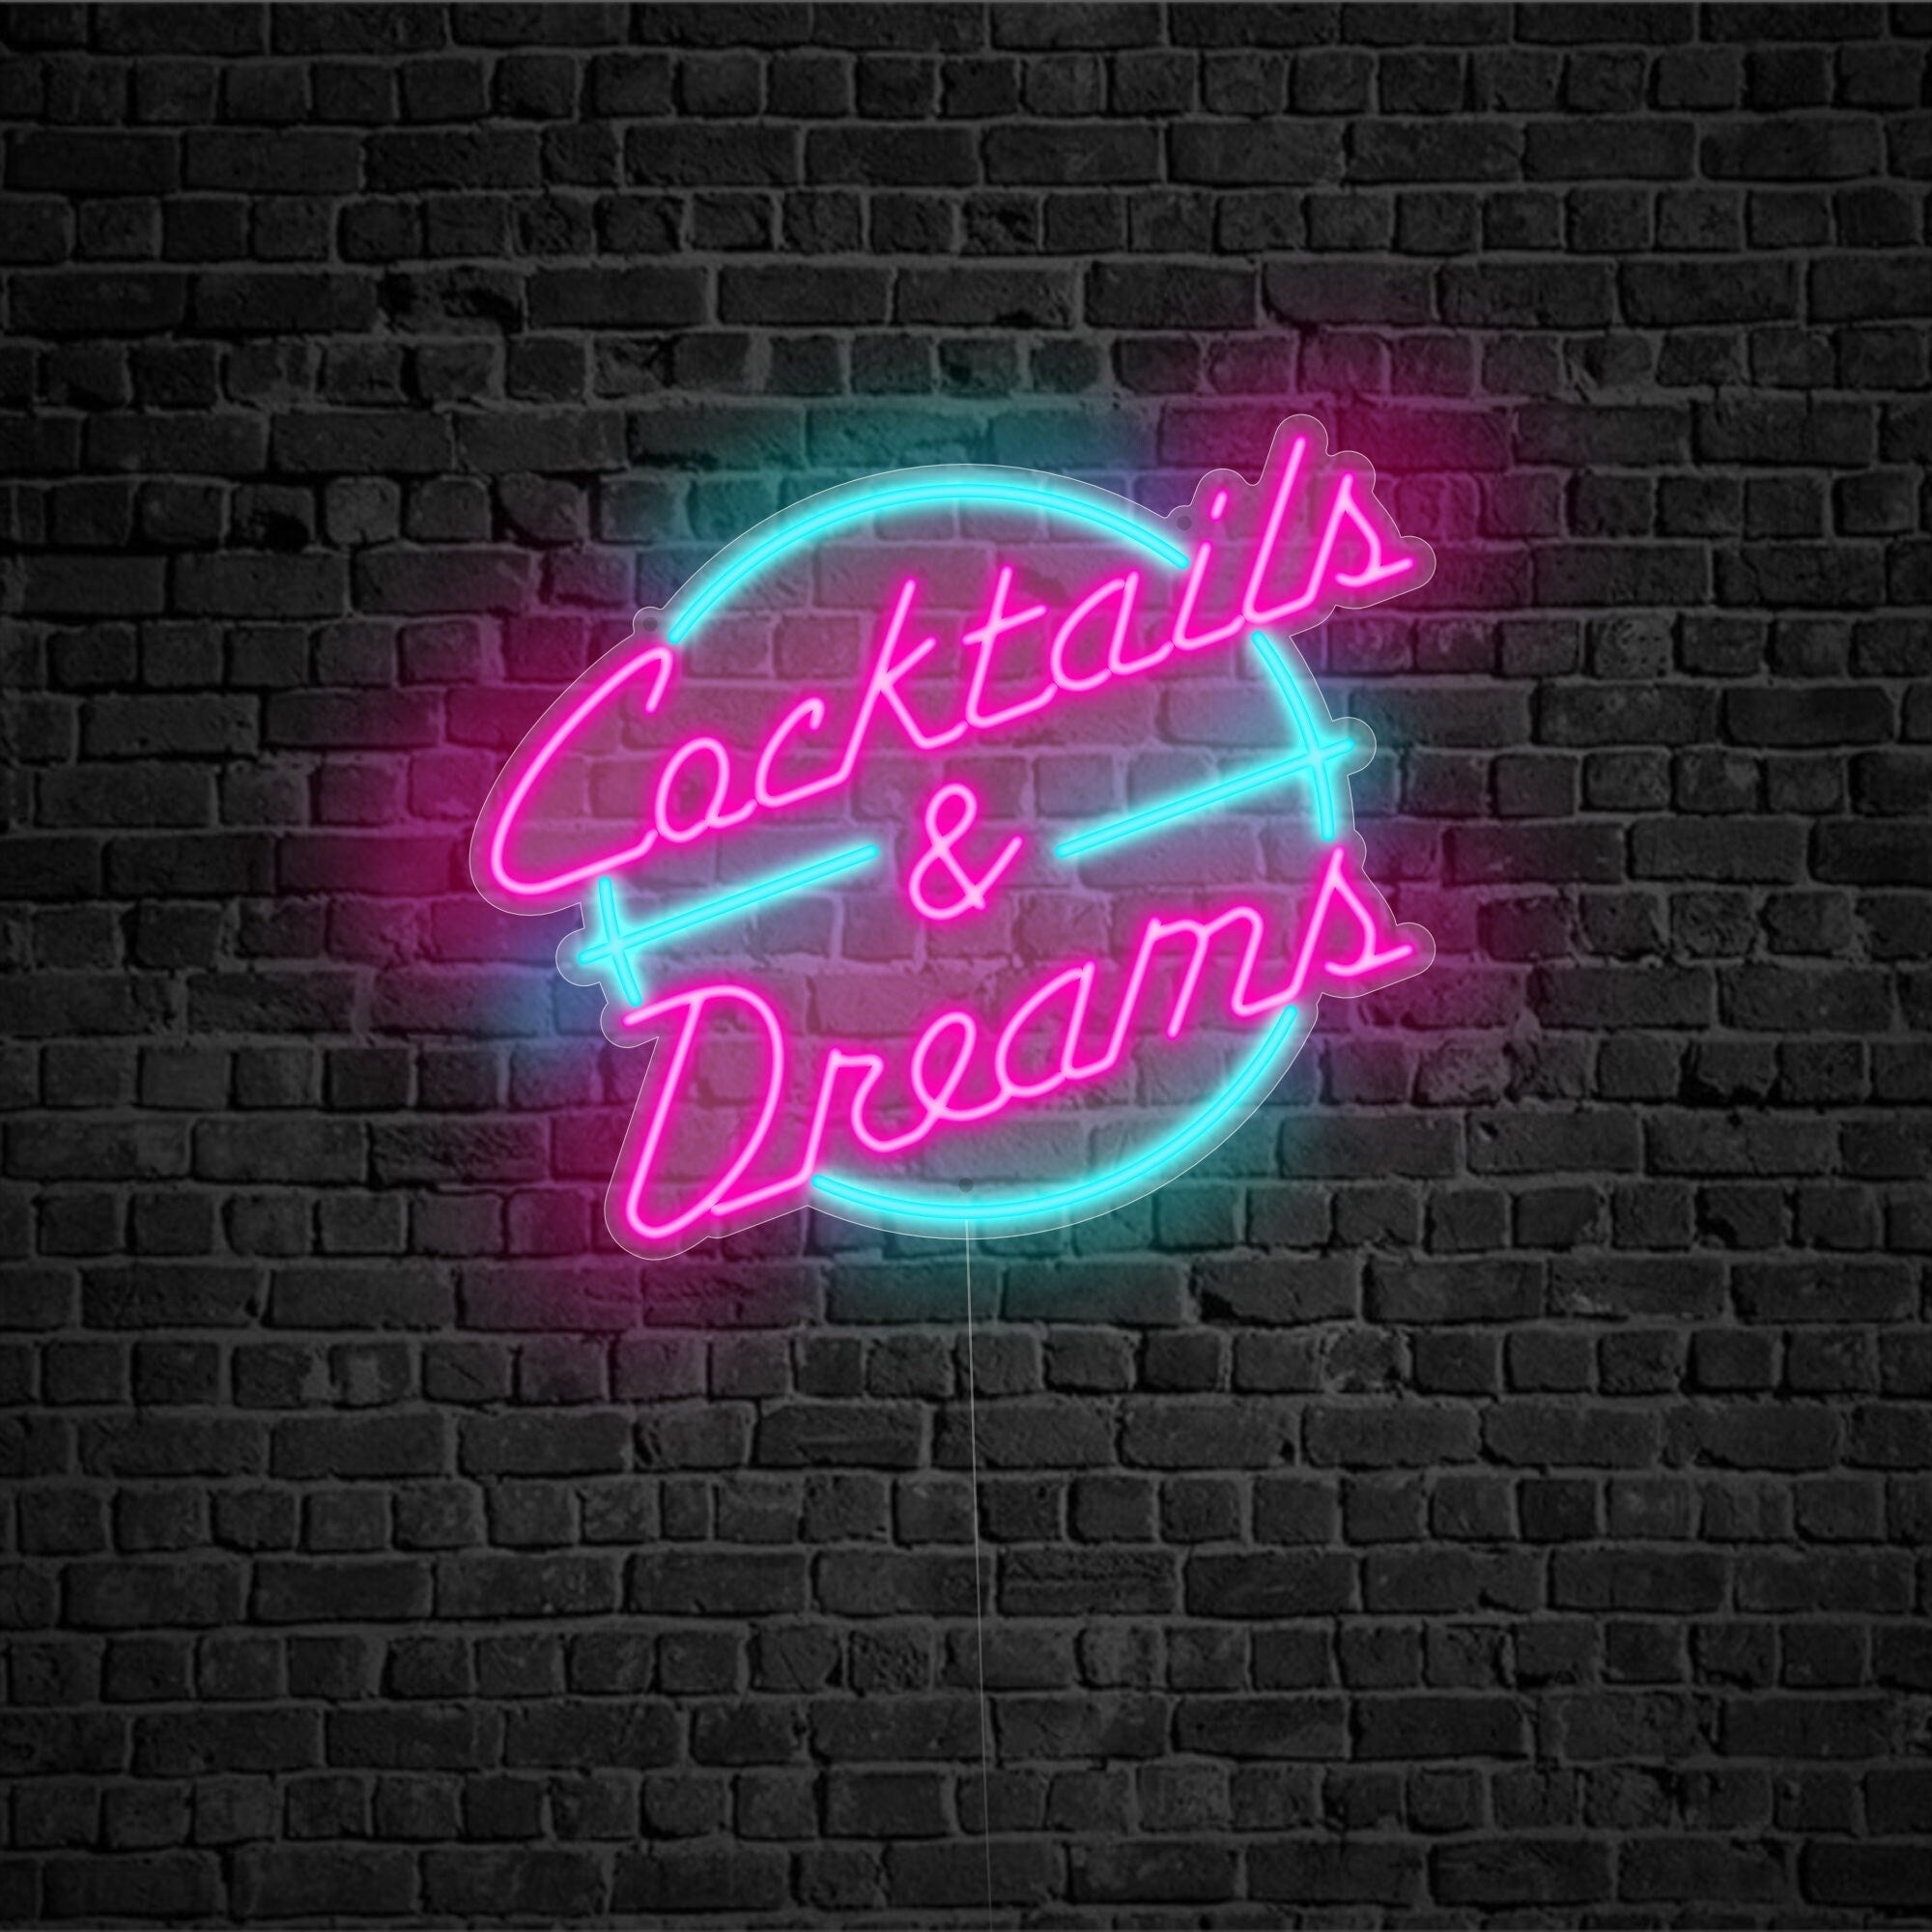 Cocktails & Dreams Neon Sign, Retro 80's Bar Neon Sign, Arcade or Man-cave LED Light, Custom Neon Signs